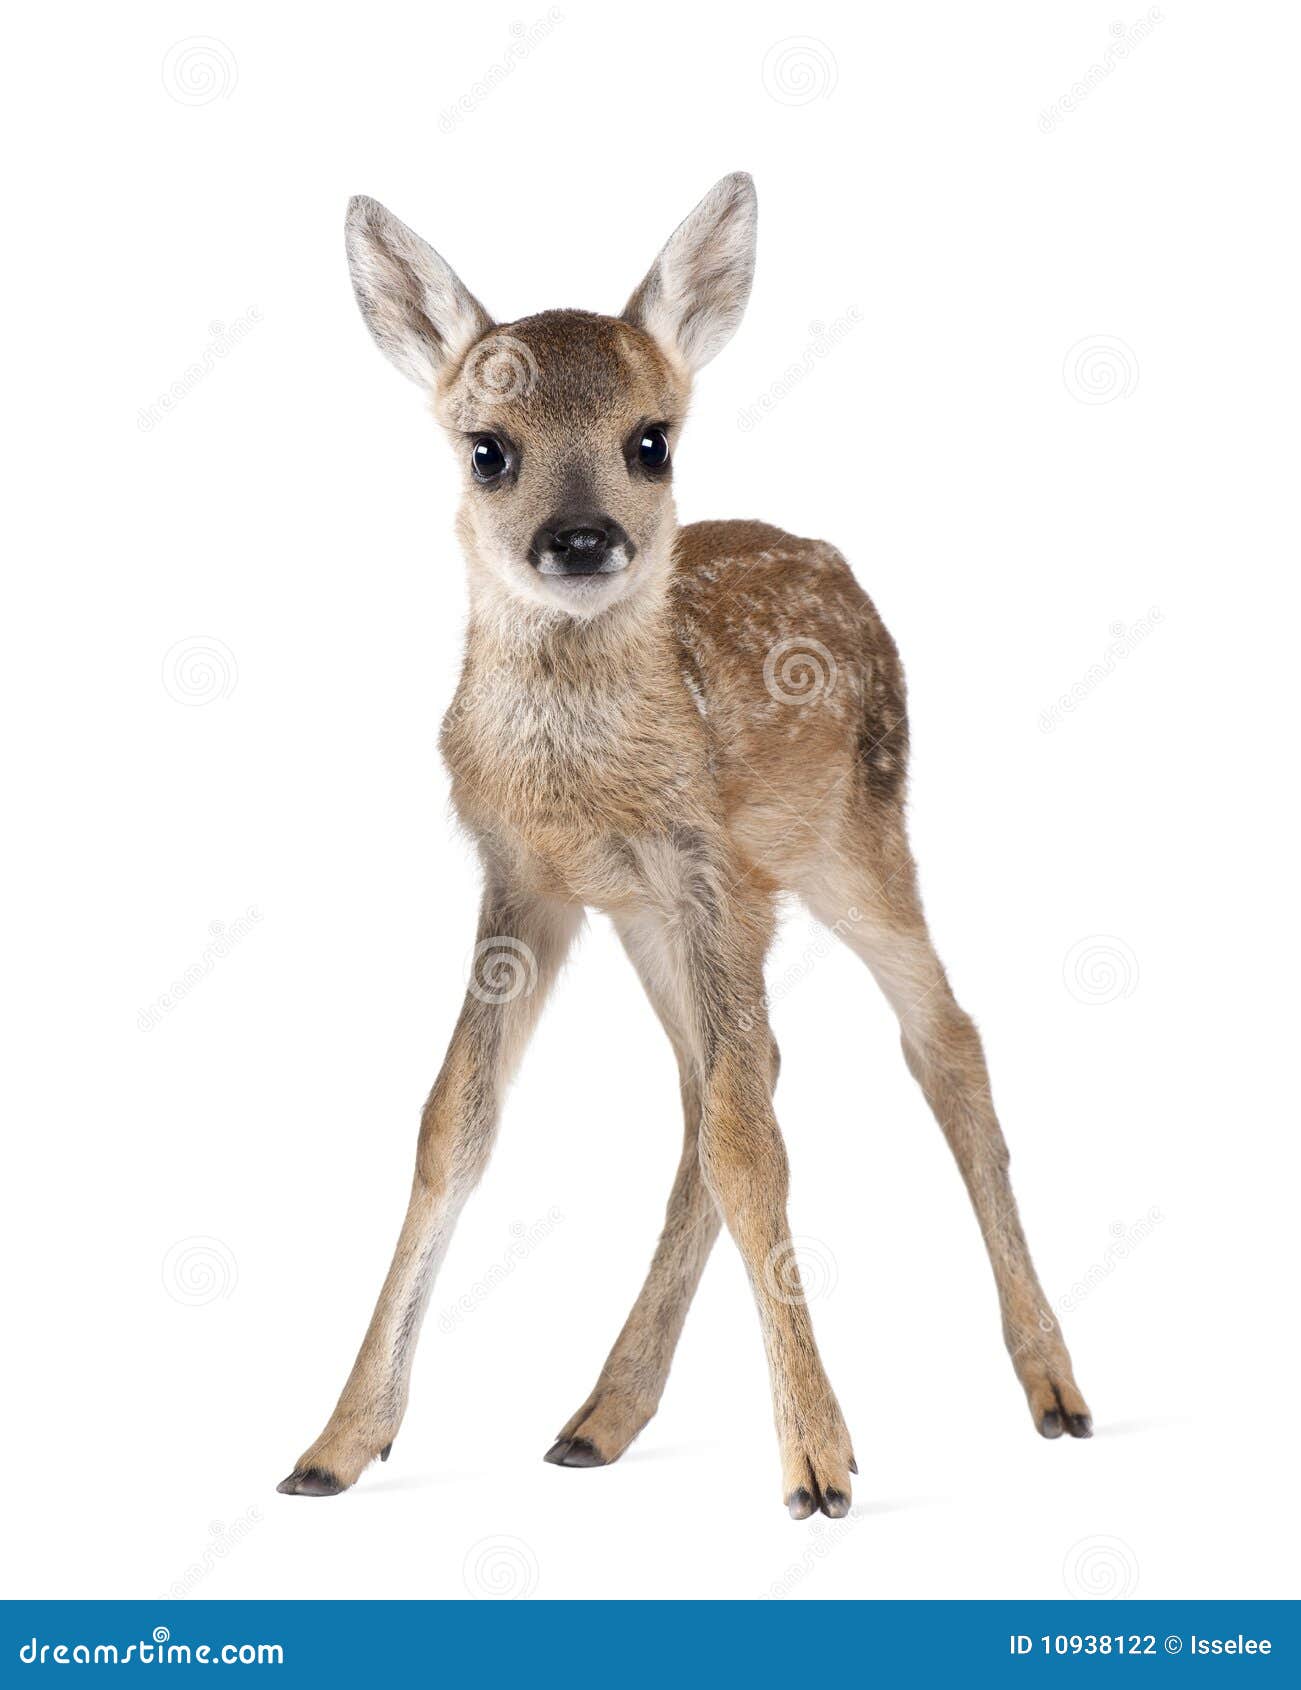 roe deer fawn in front of a white background